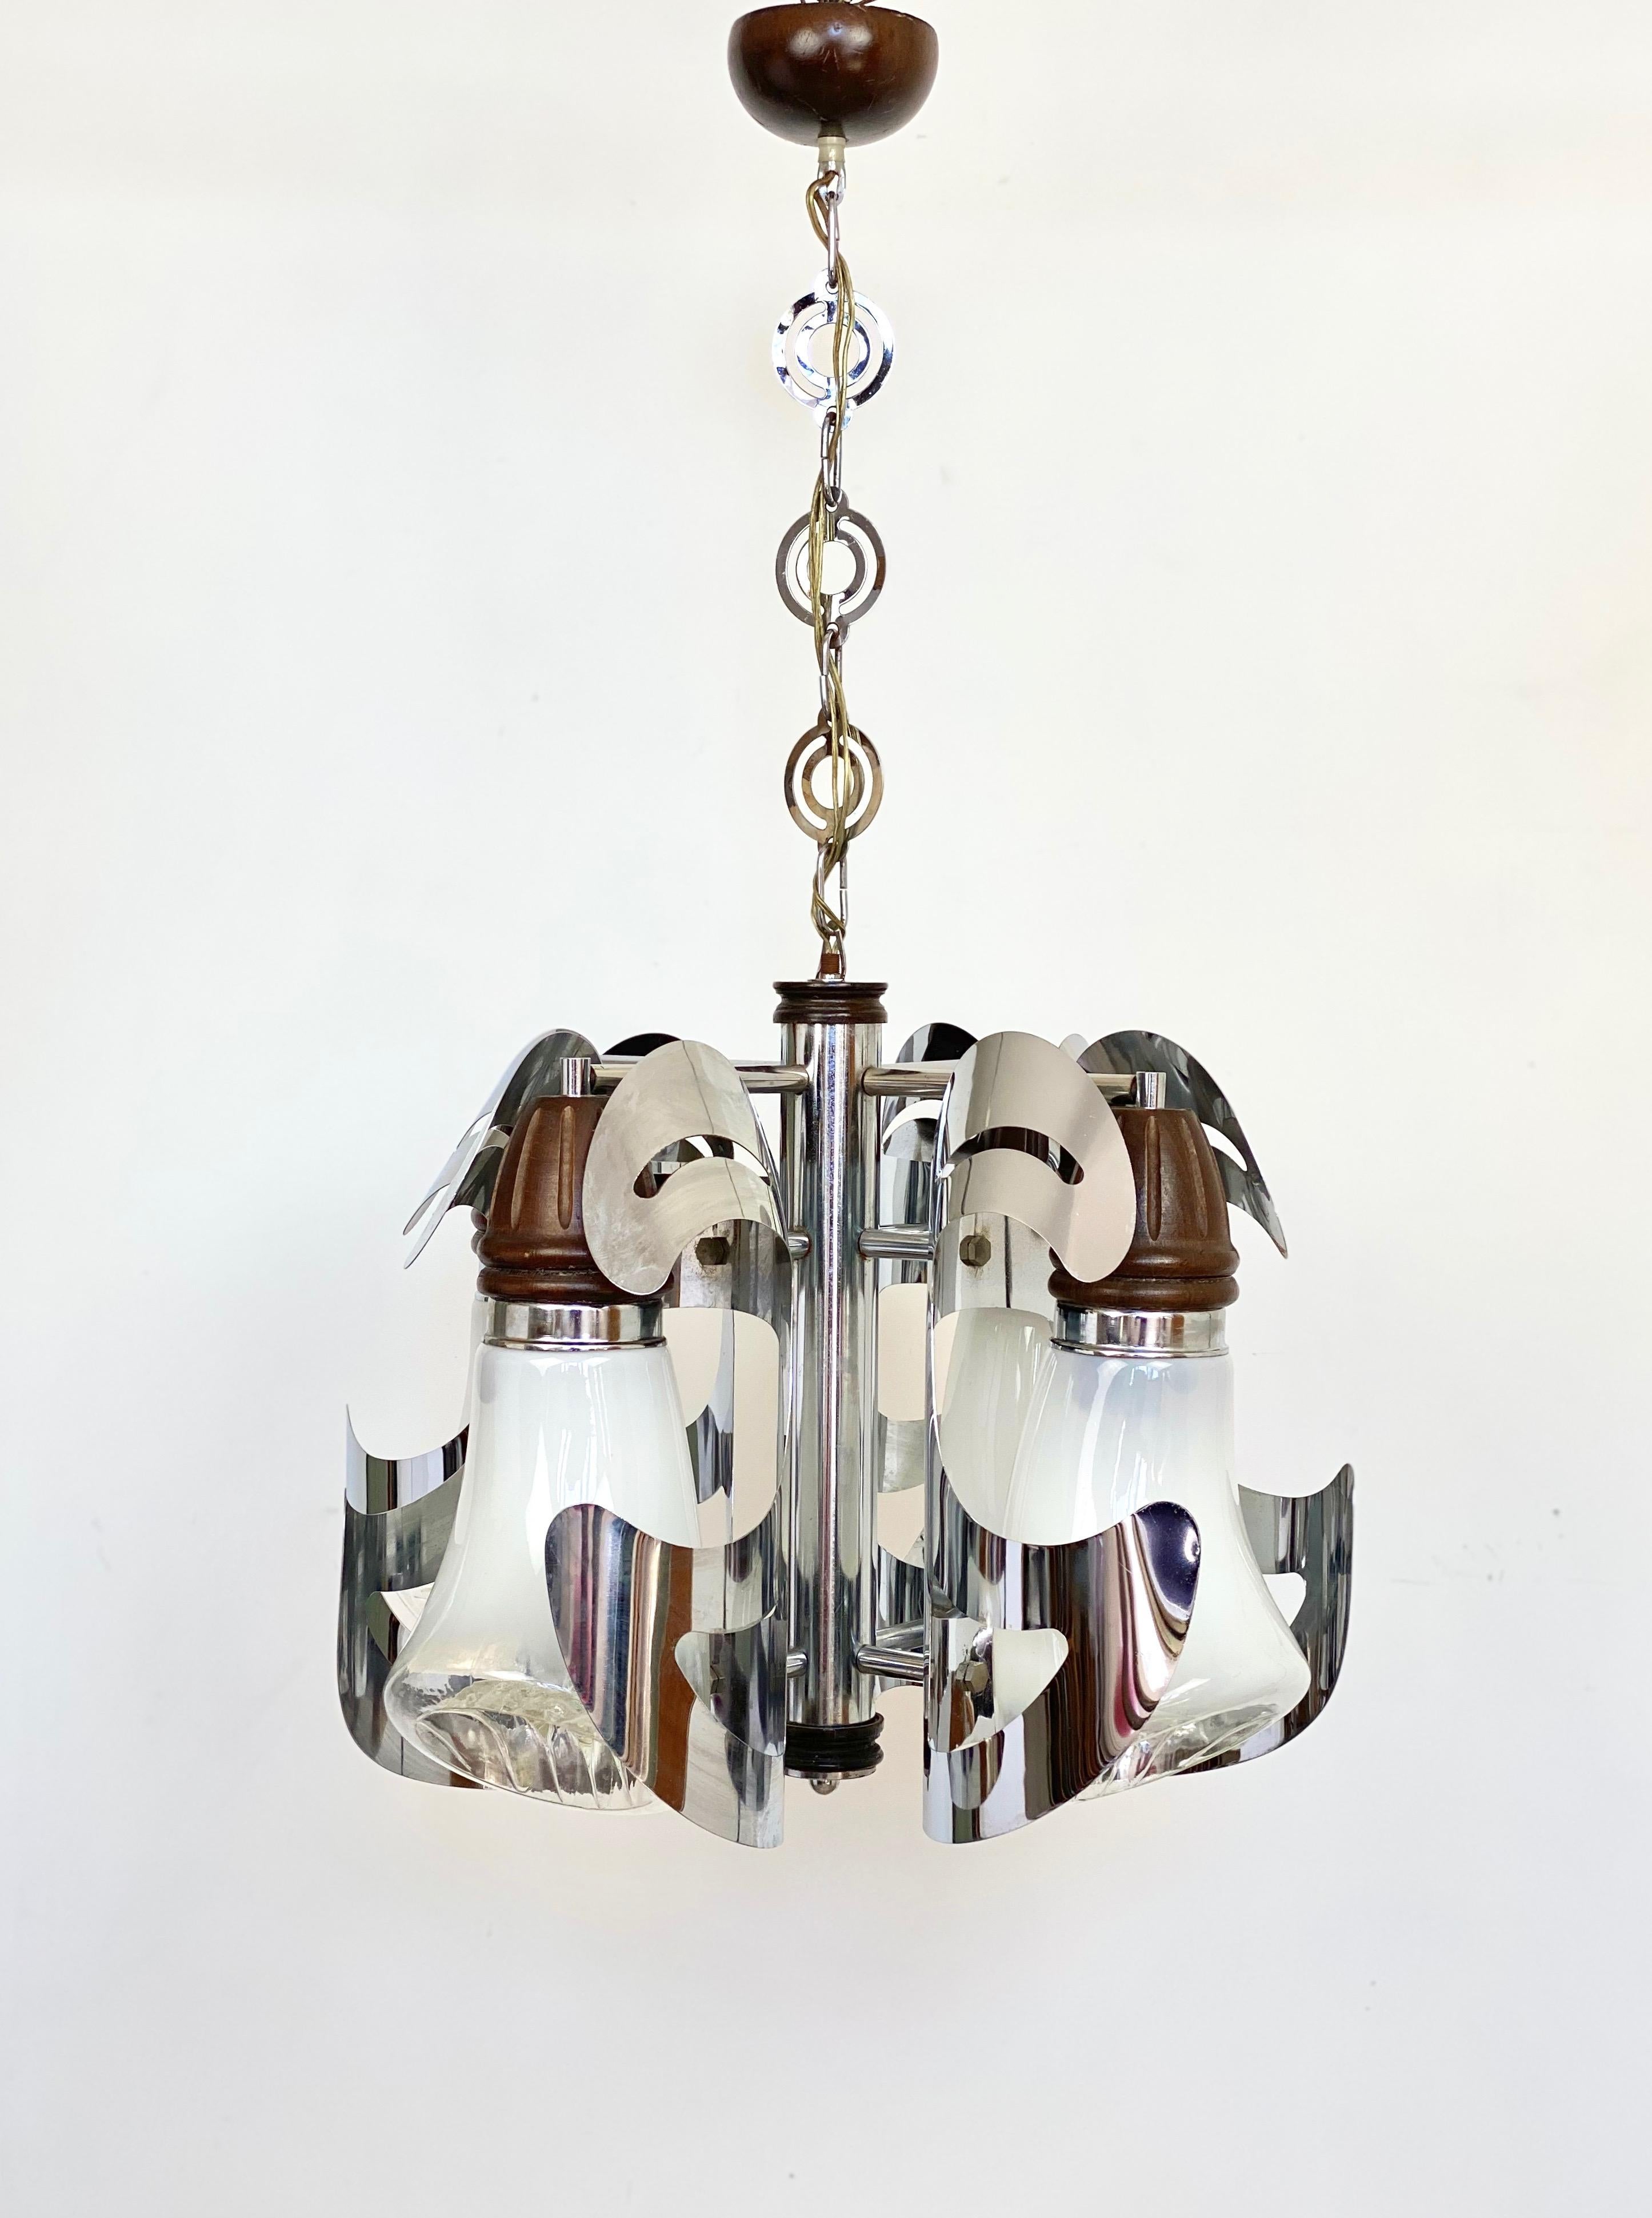 Chandelier by Mazzega Chrome, Wood and Murano Glass, Italy, 1970s For Sale 9